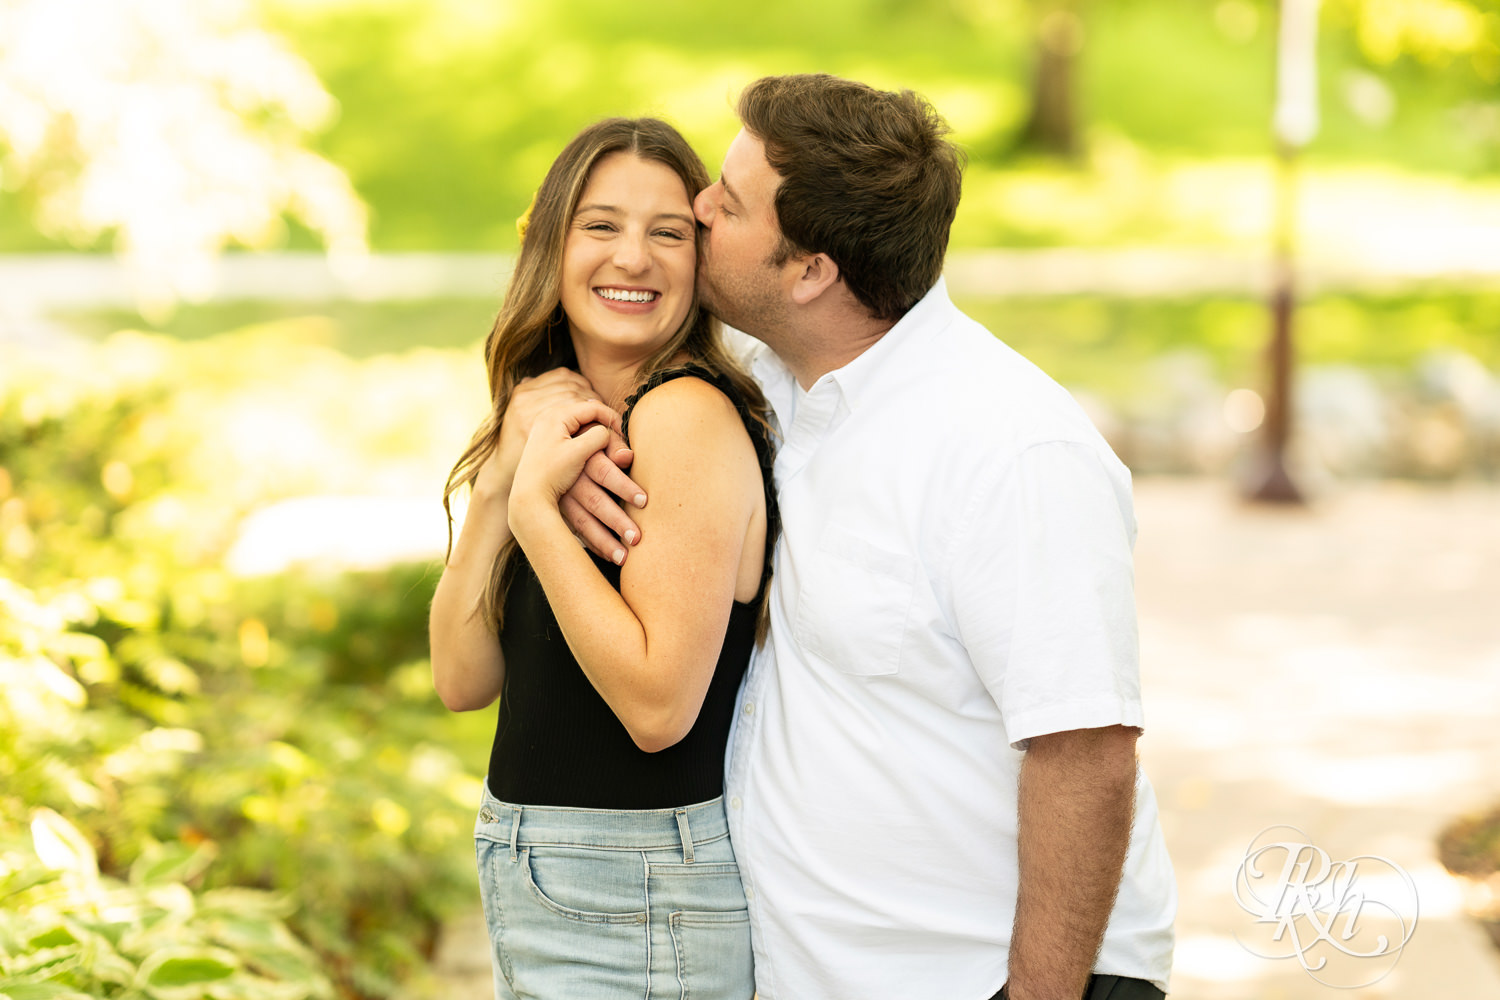 Man and woman smile during engagement photography at Centennial Lakes Park in Edina, Minnesota.